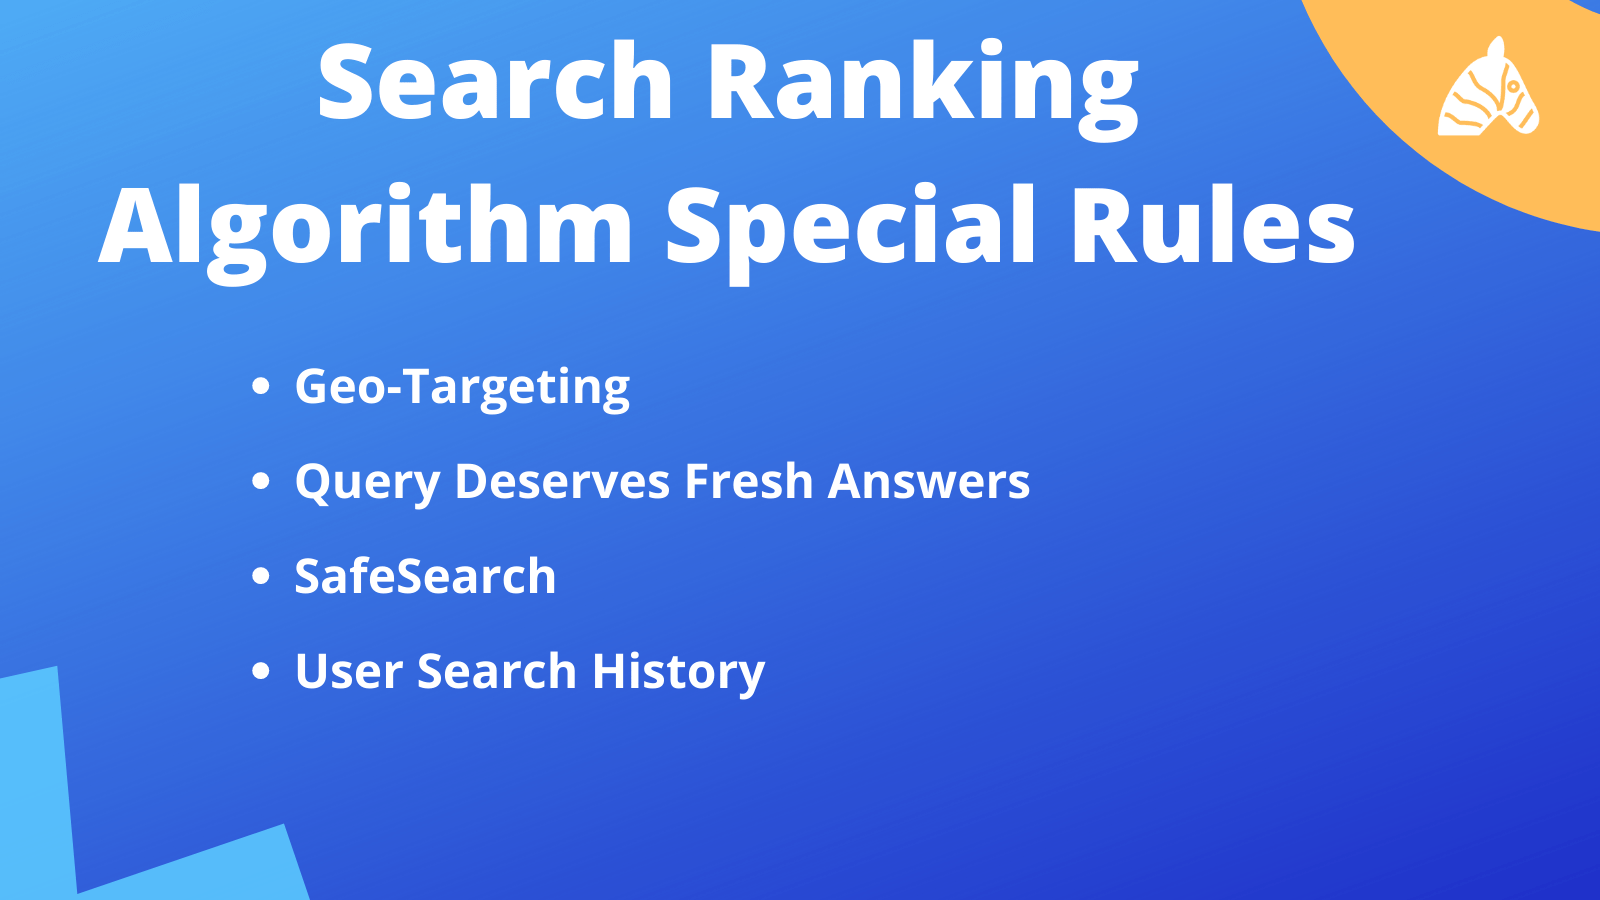 Search ranking algorithm special rules